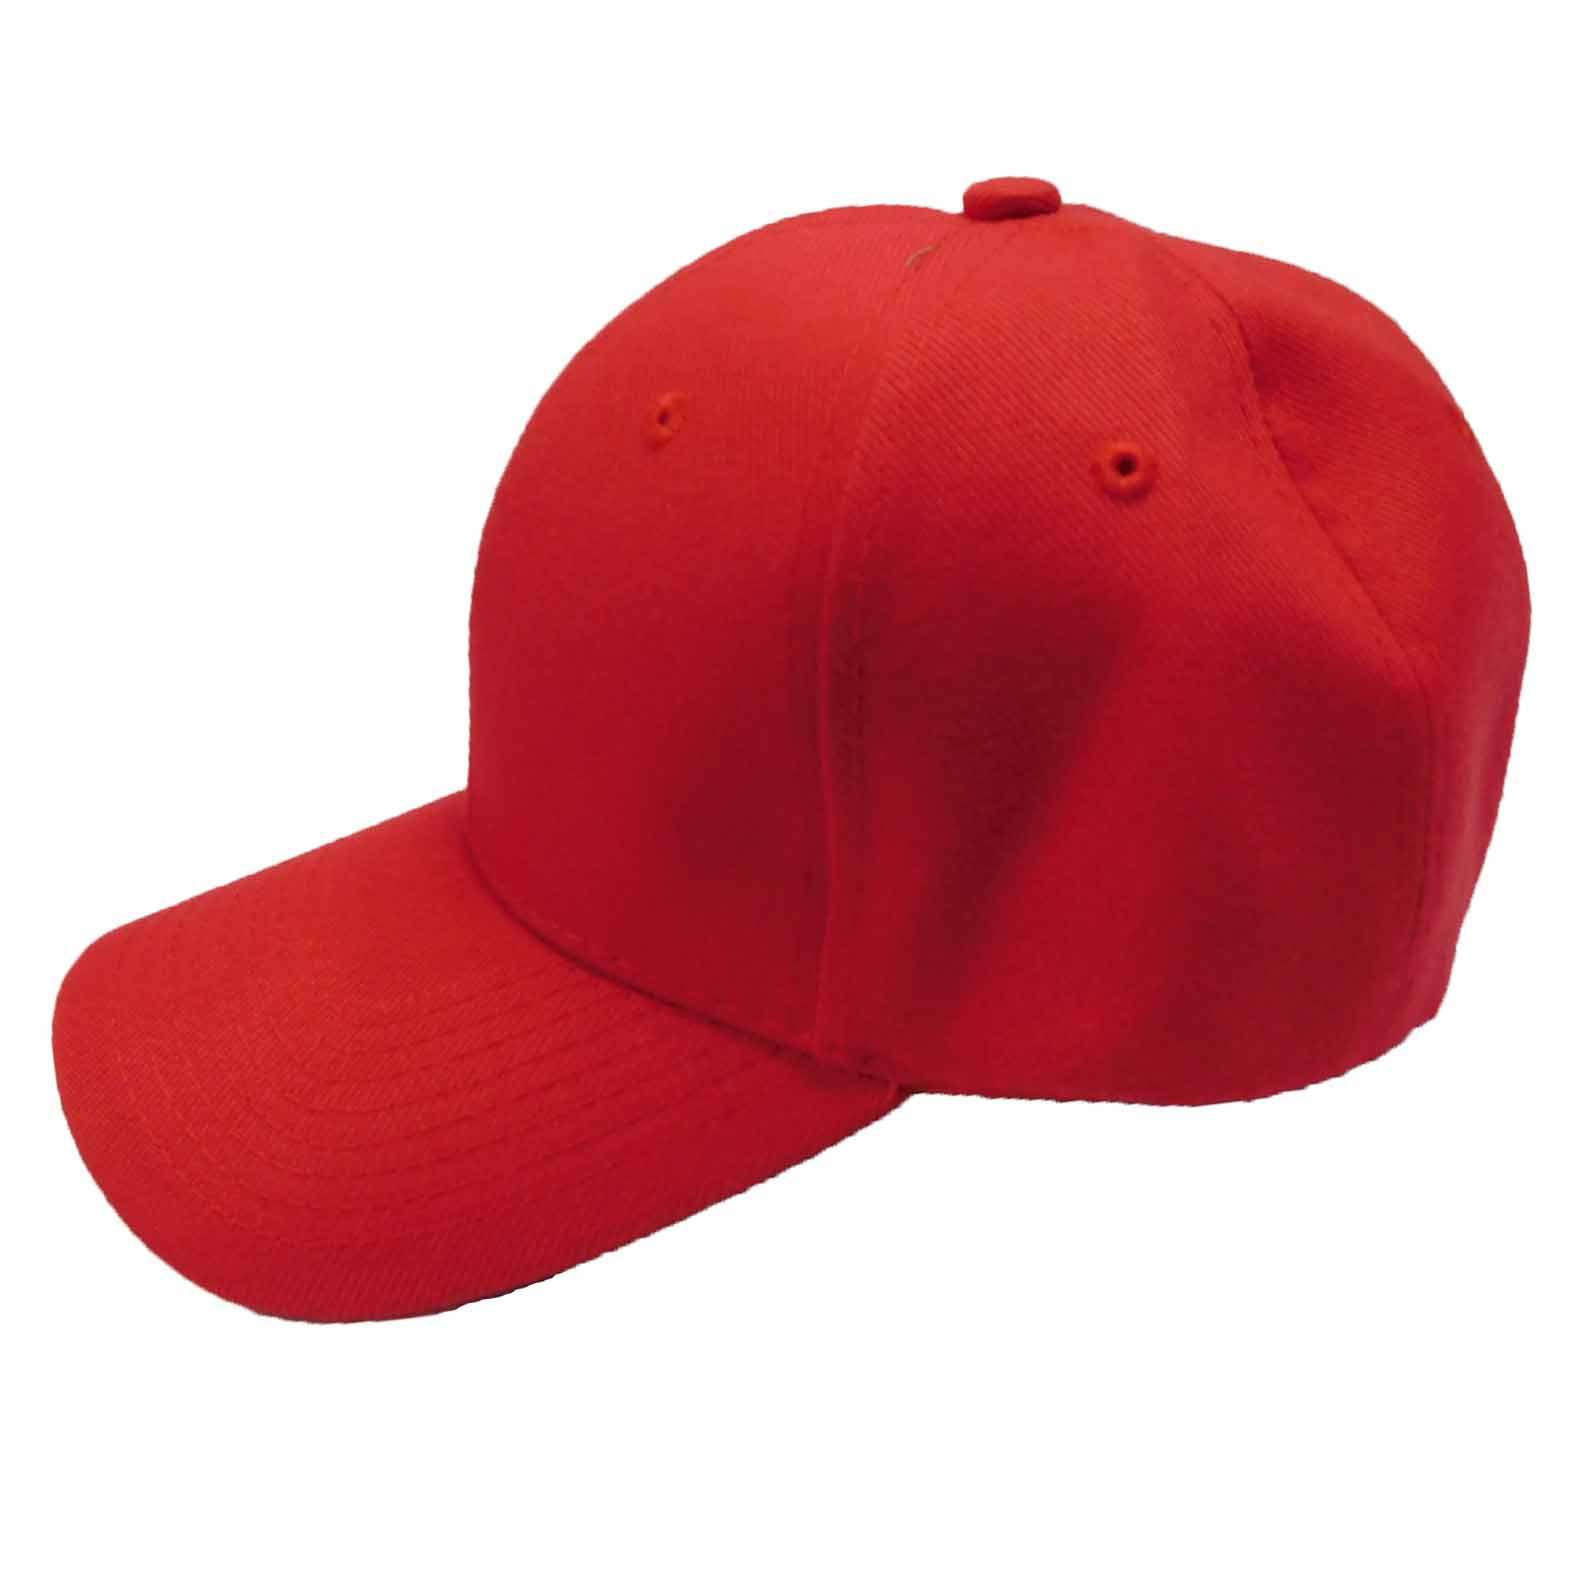 Baseball Cap with Stitched Bill Cap Milani Hats C001RD Red  